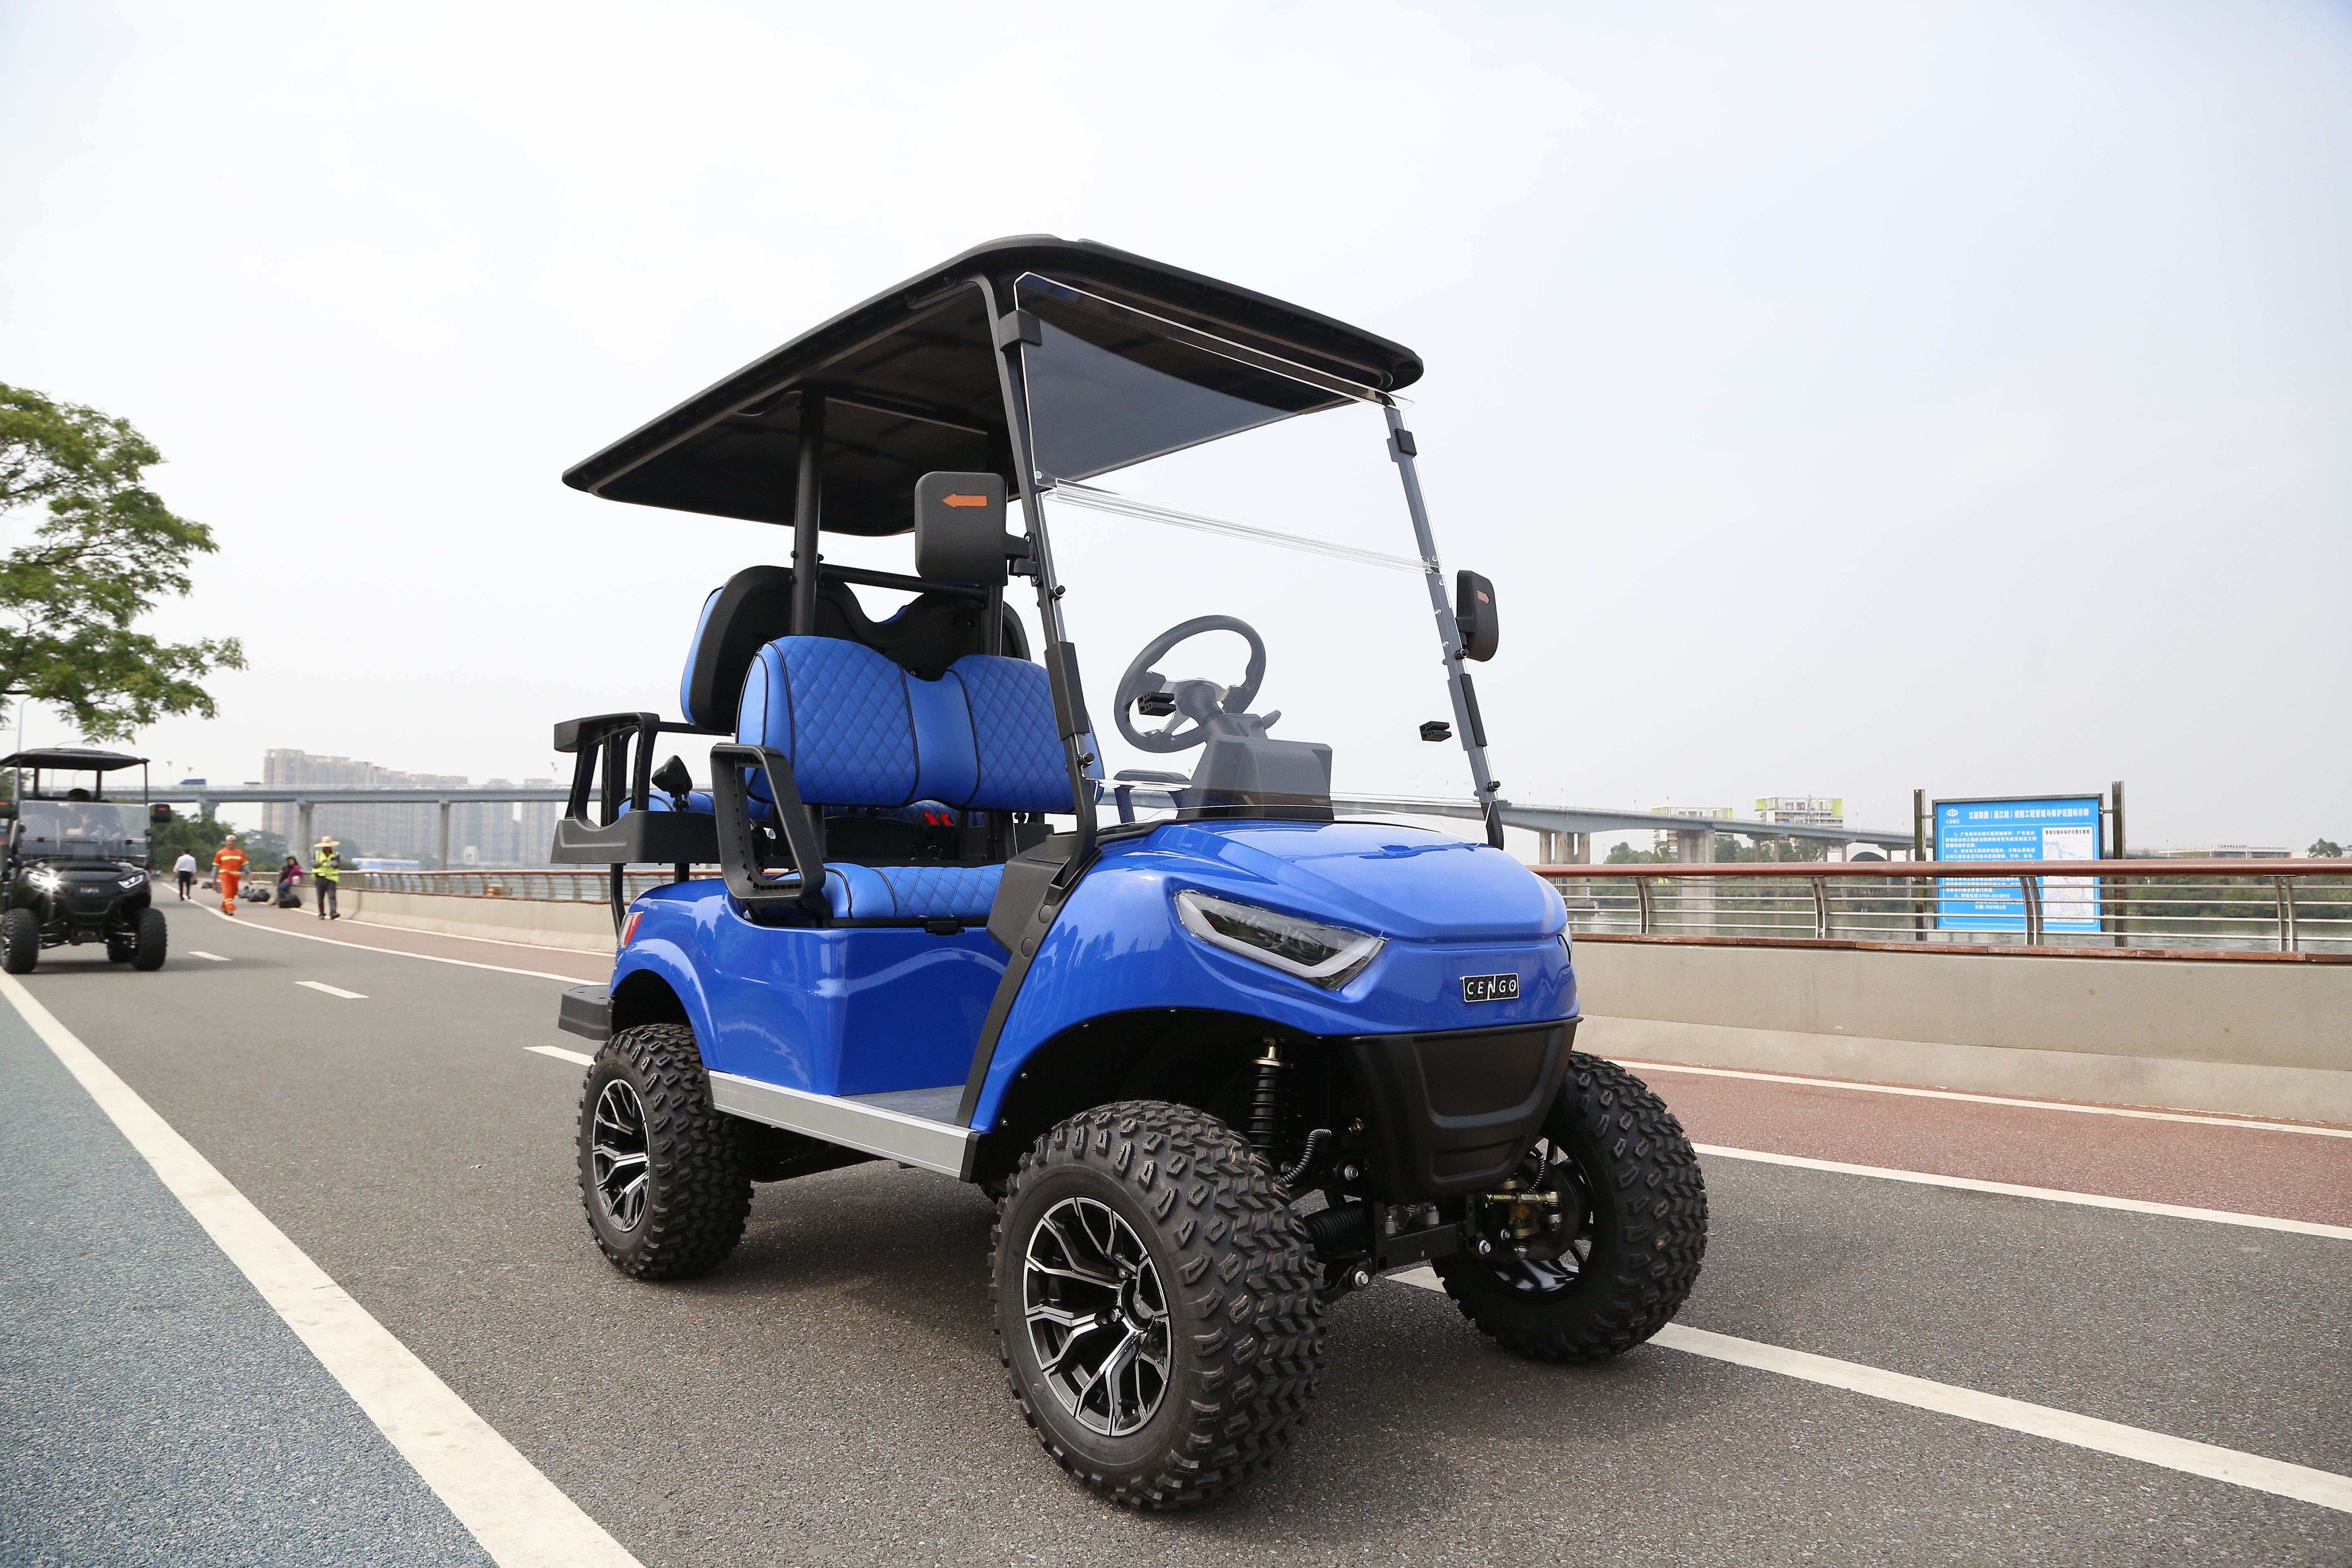 Off Road Golf Cart 4 Passenger with Main Alloy Frame